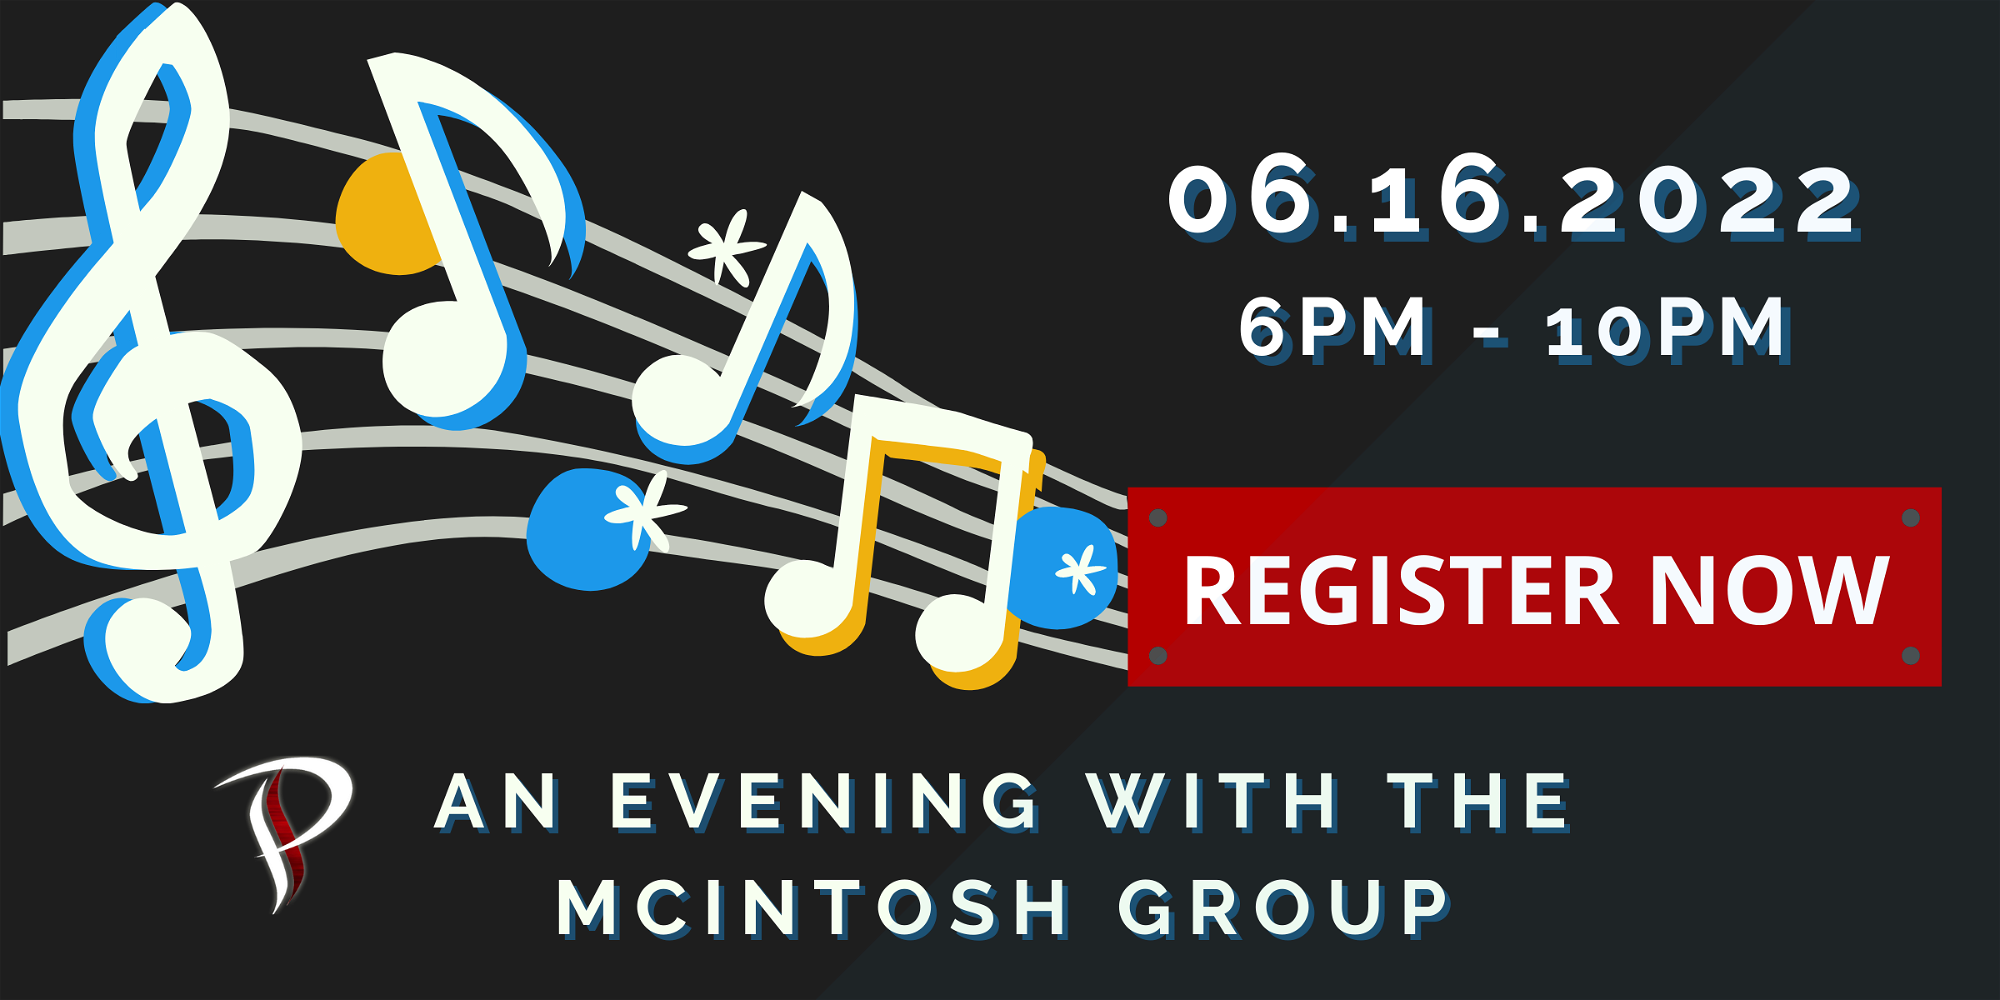 An Evening with the McIntosh Group invitation